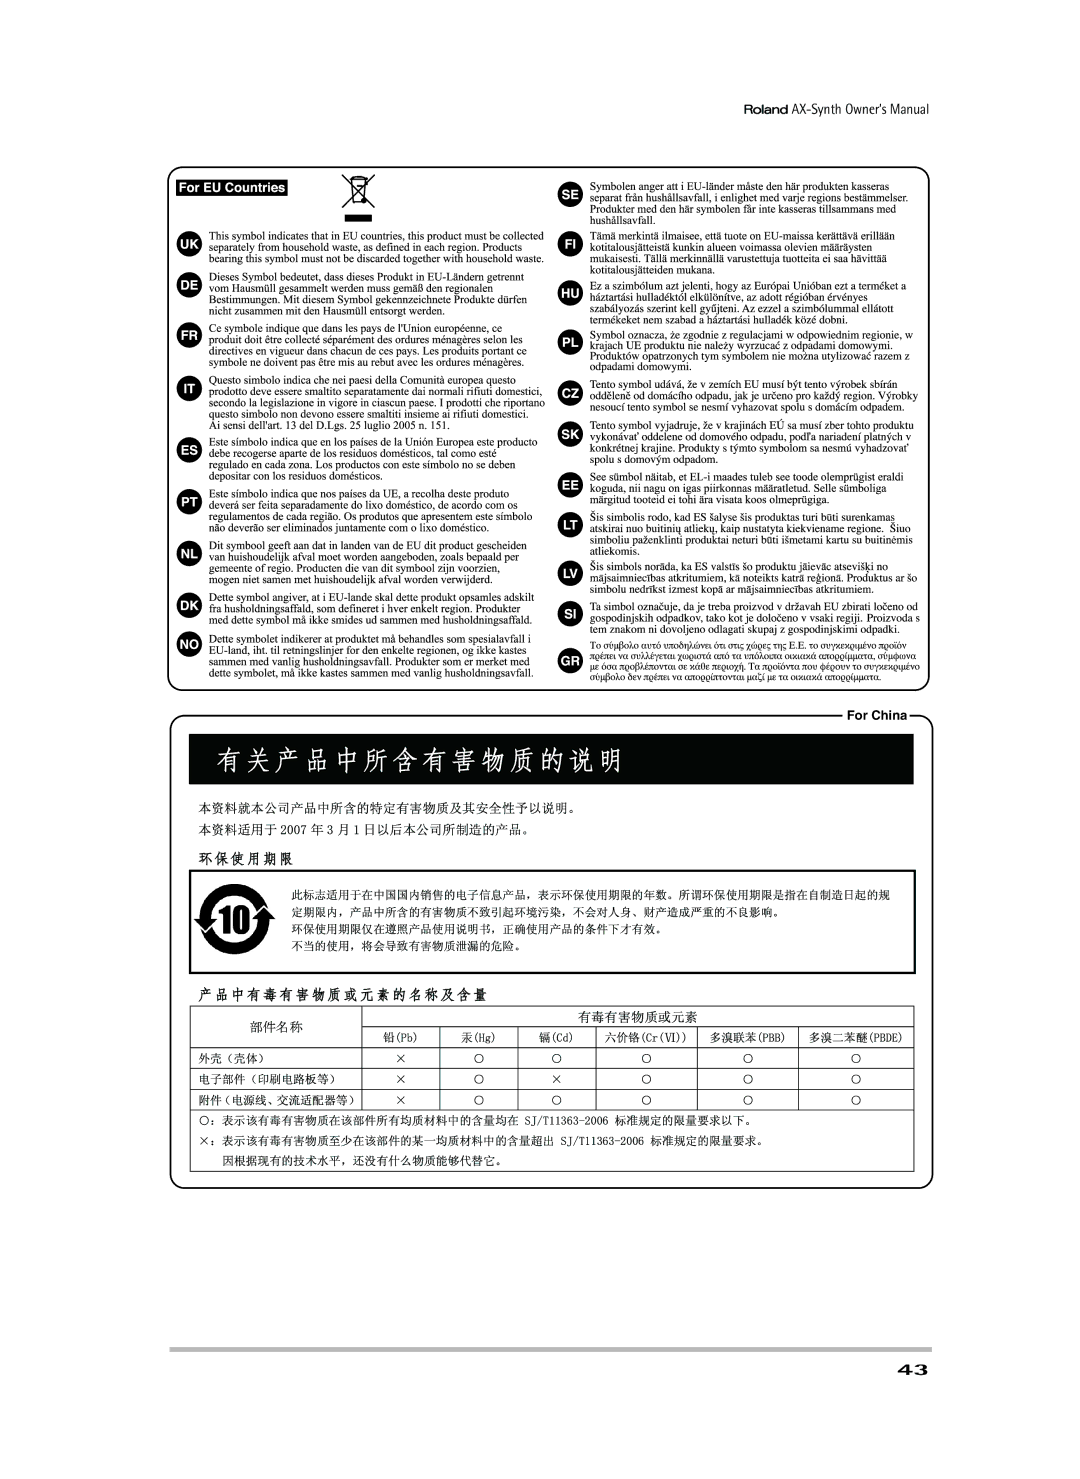 Roland AX-Synth owner manual For China 